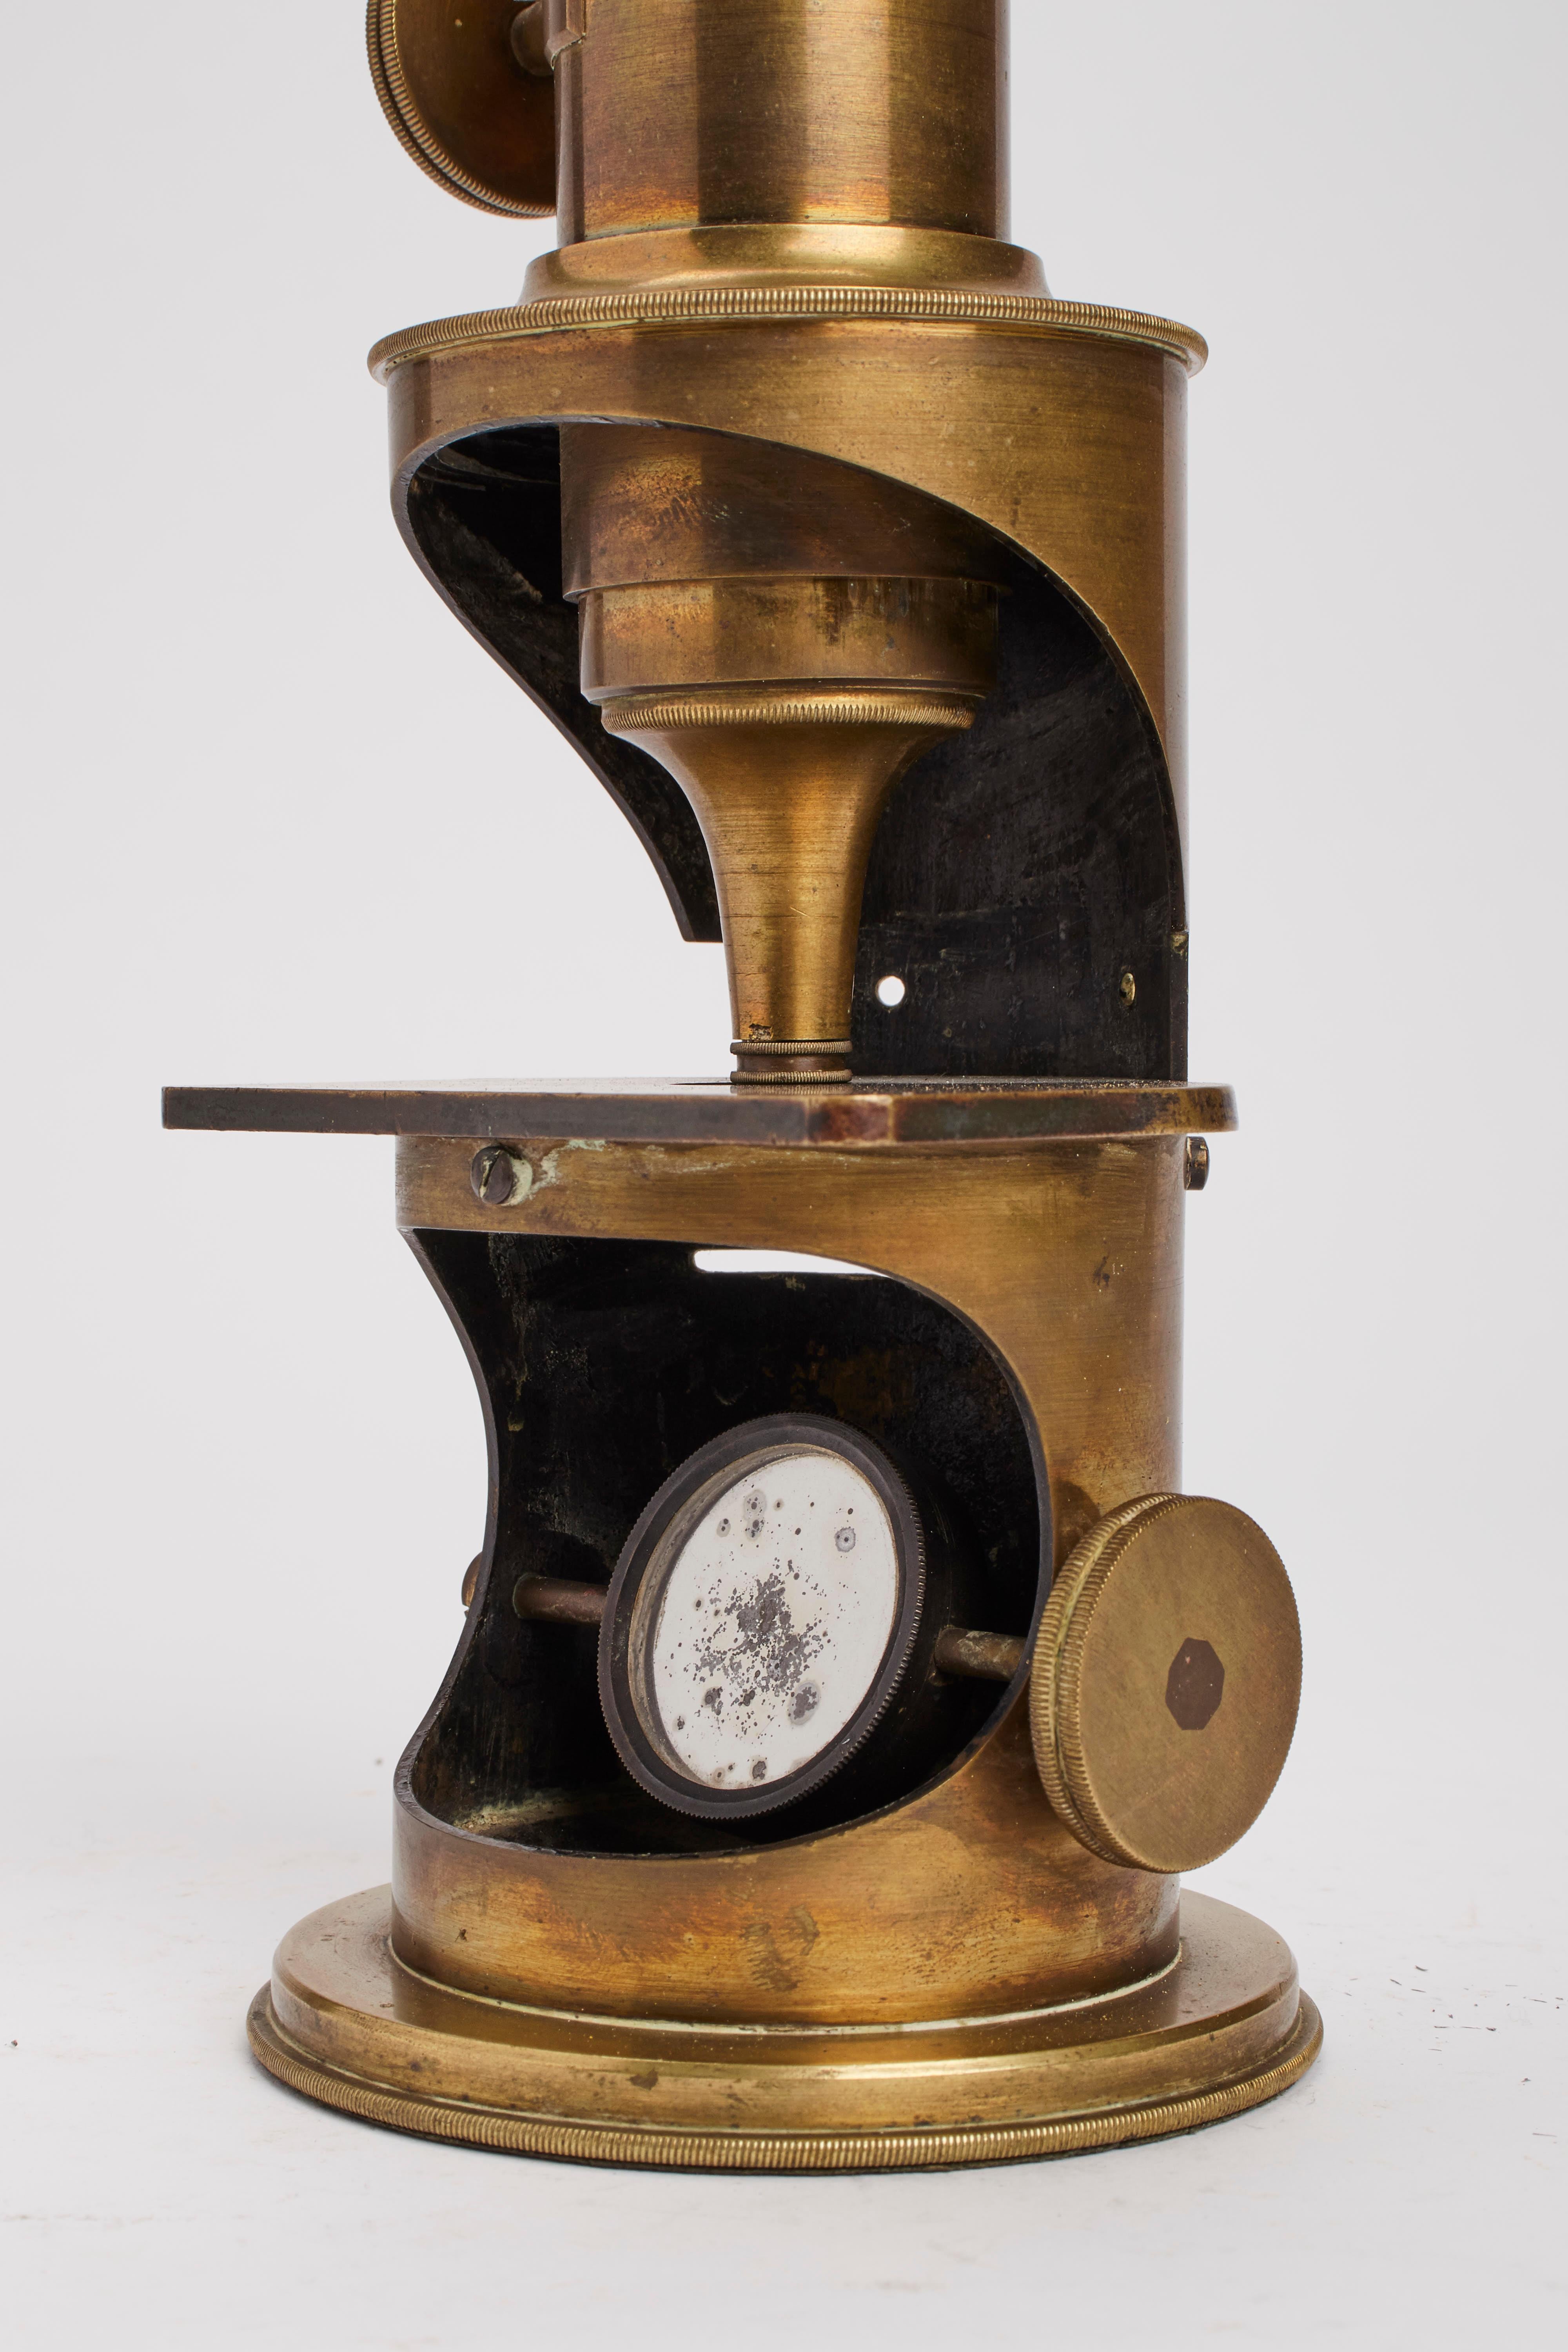 Brass A monocular microscope with wooden box, France 1800.  